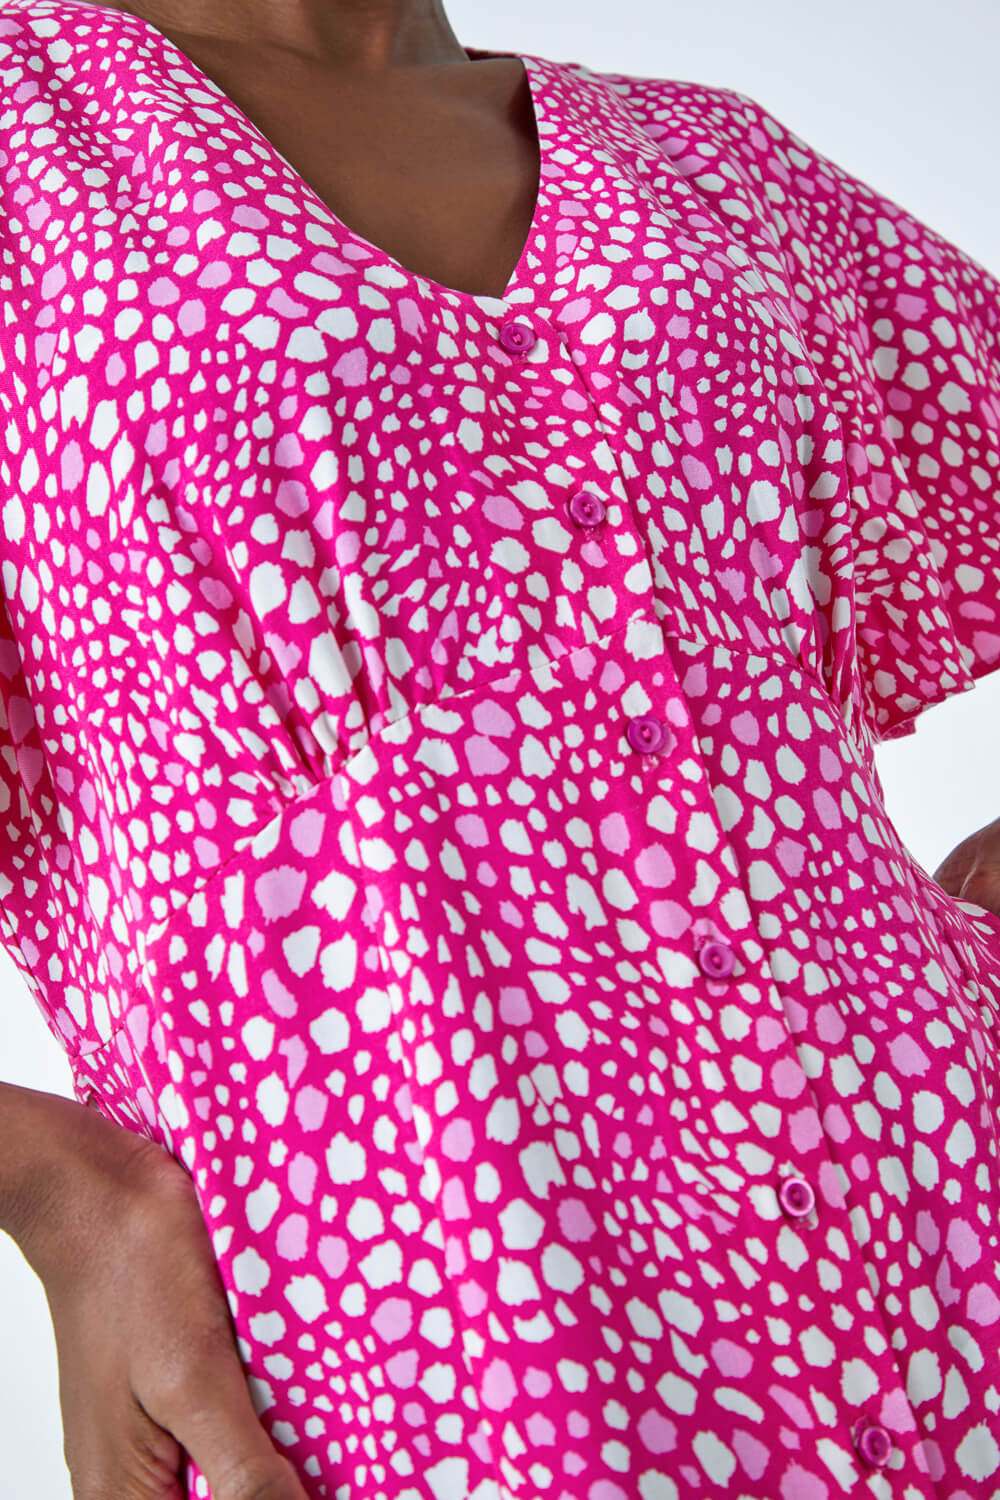 PINK Ditsy Spot Print Button Dress, Image 5 of 5